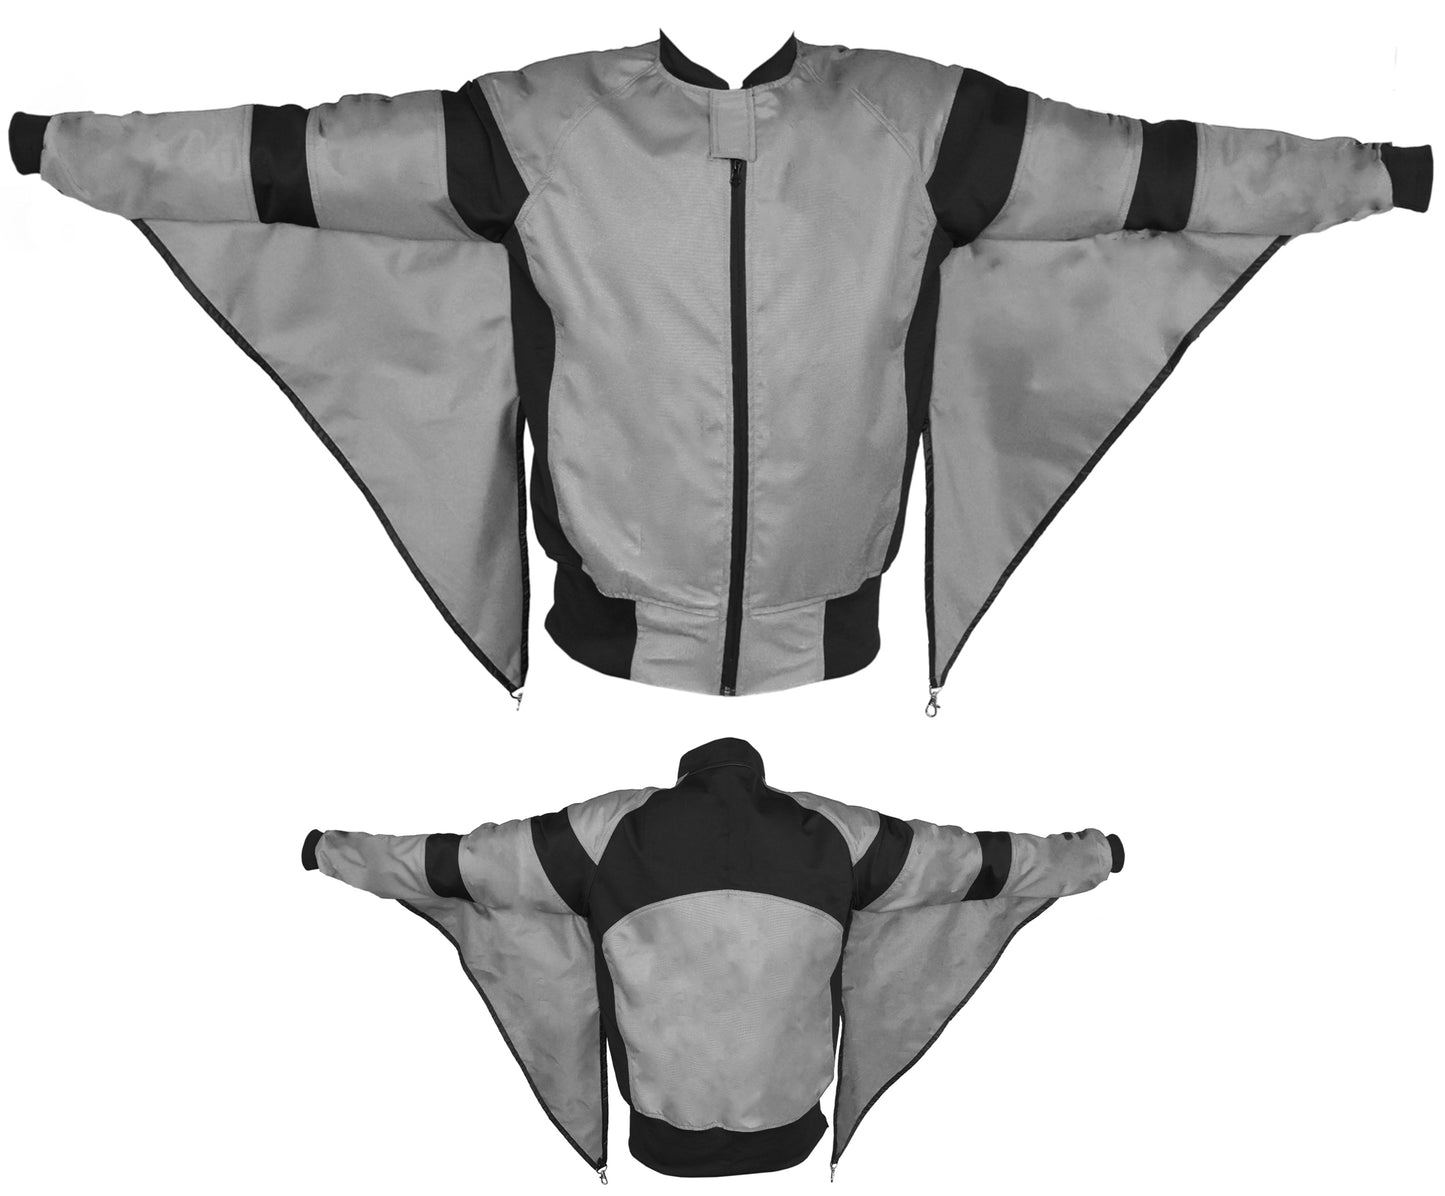 Unique colors Skydiving Camera jacket nd-038